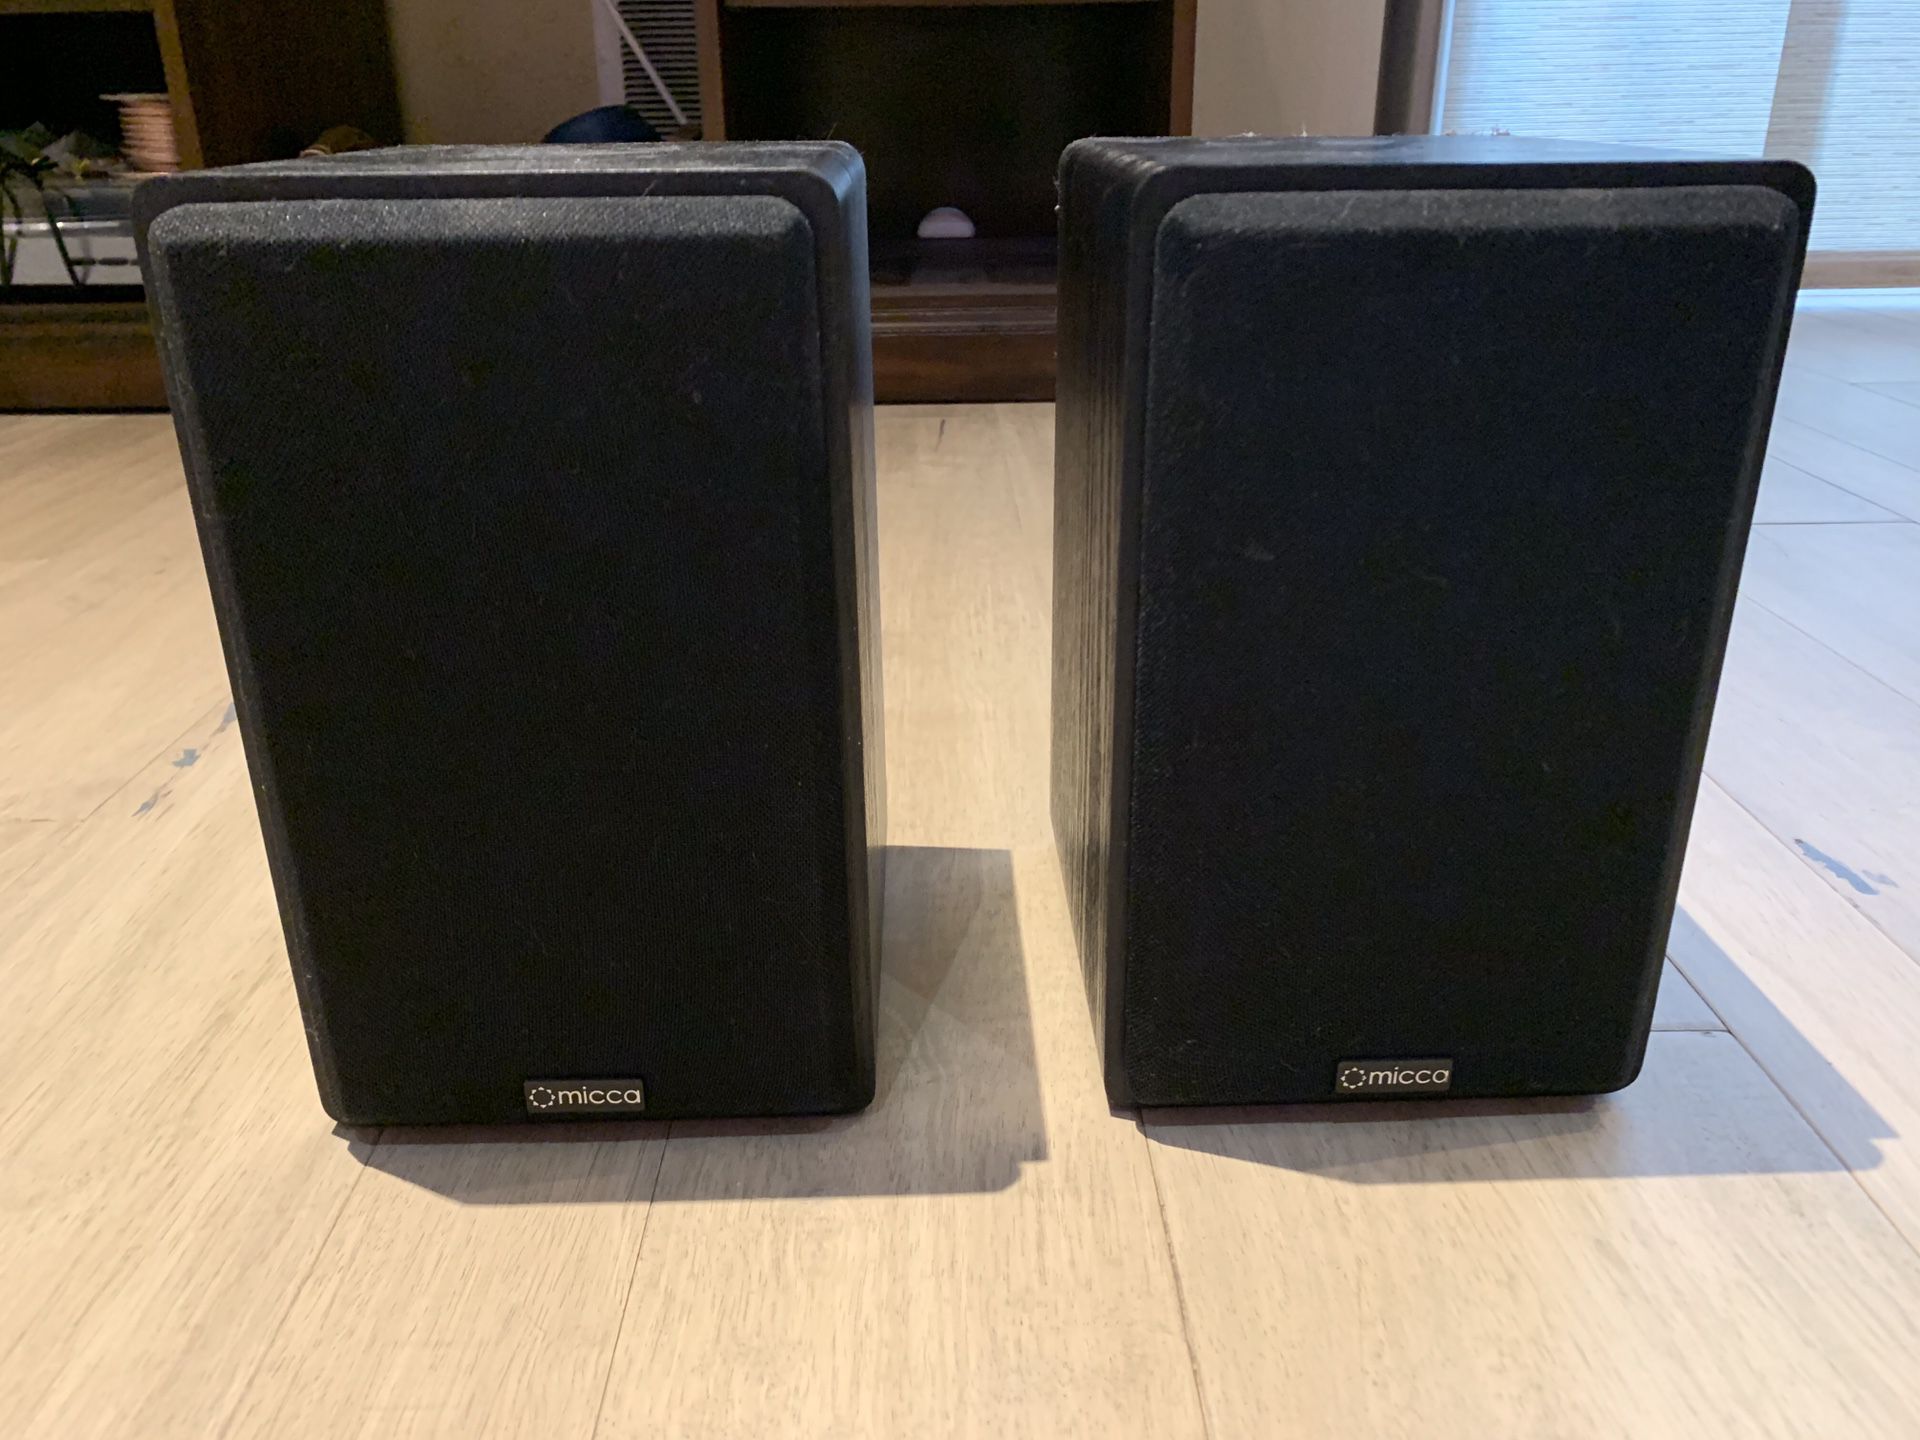 Available as set or individually: Mica MB 42 bookshelf speakers, Lepy LP-2024A+ hi-fi power amplifier, Audio Technica AT-LP60 stereo turntable